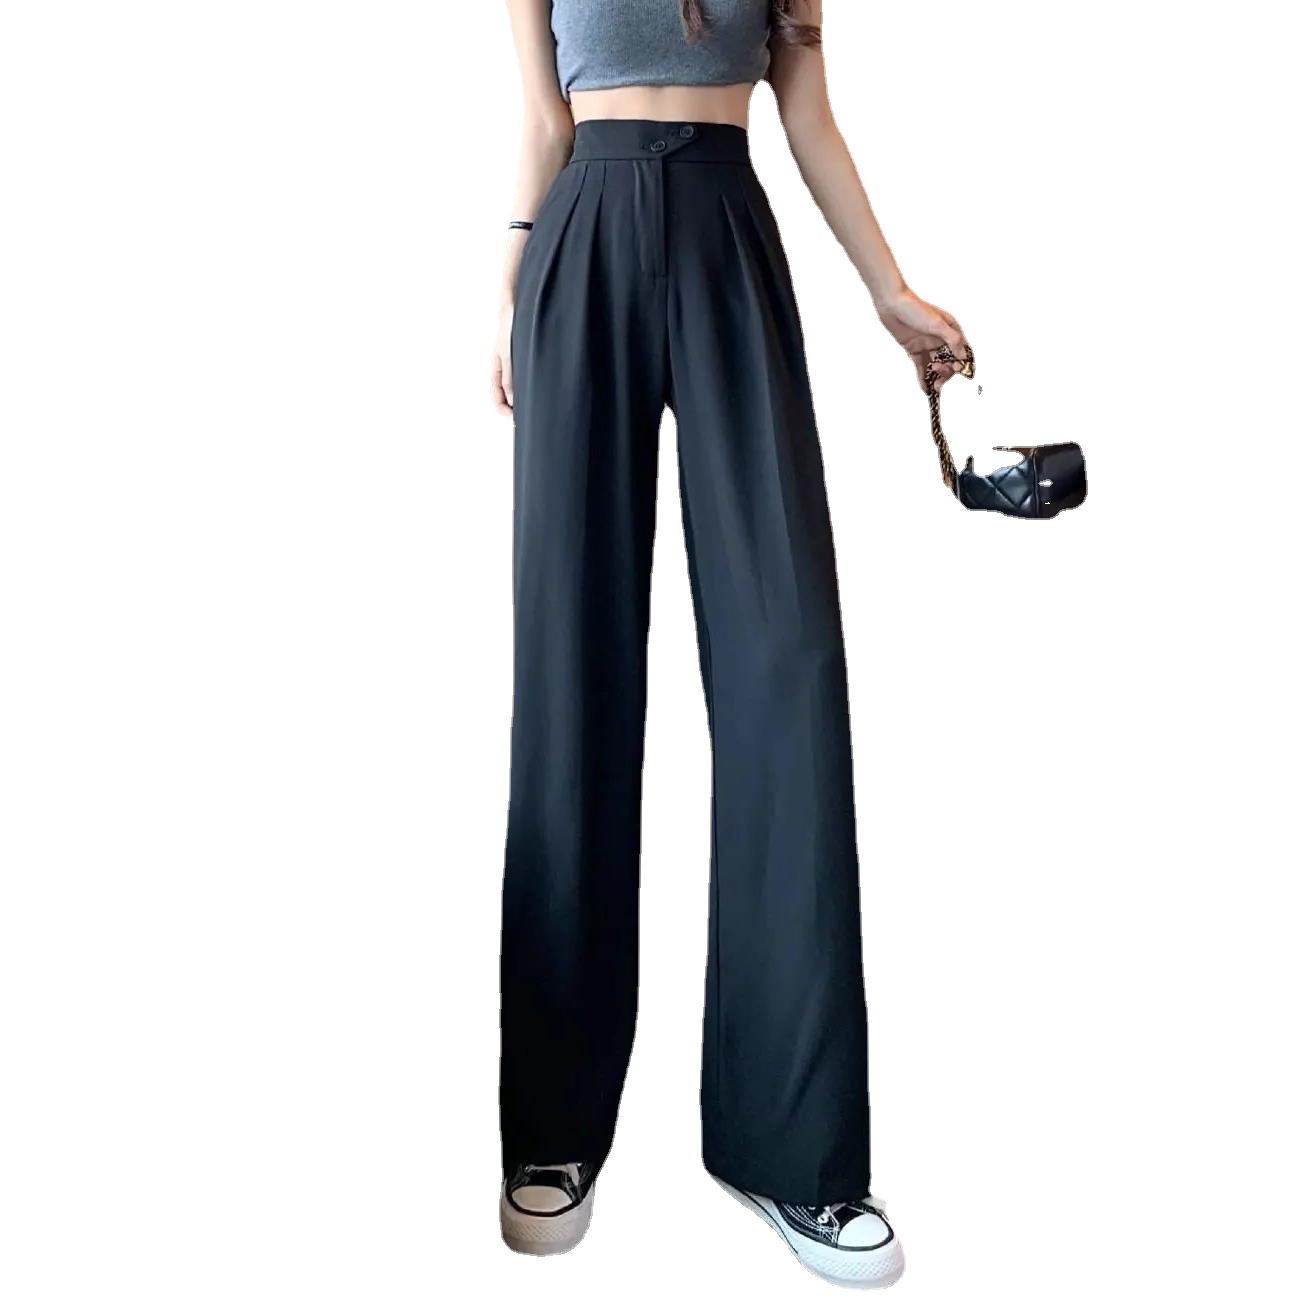 Women's Wide-Leg Pants Summer Thin High Waist Drape Mopping Slimming Straight Pants Casual Small Suit Pants All-Matching